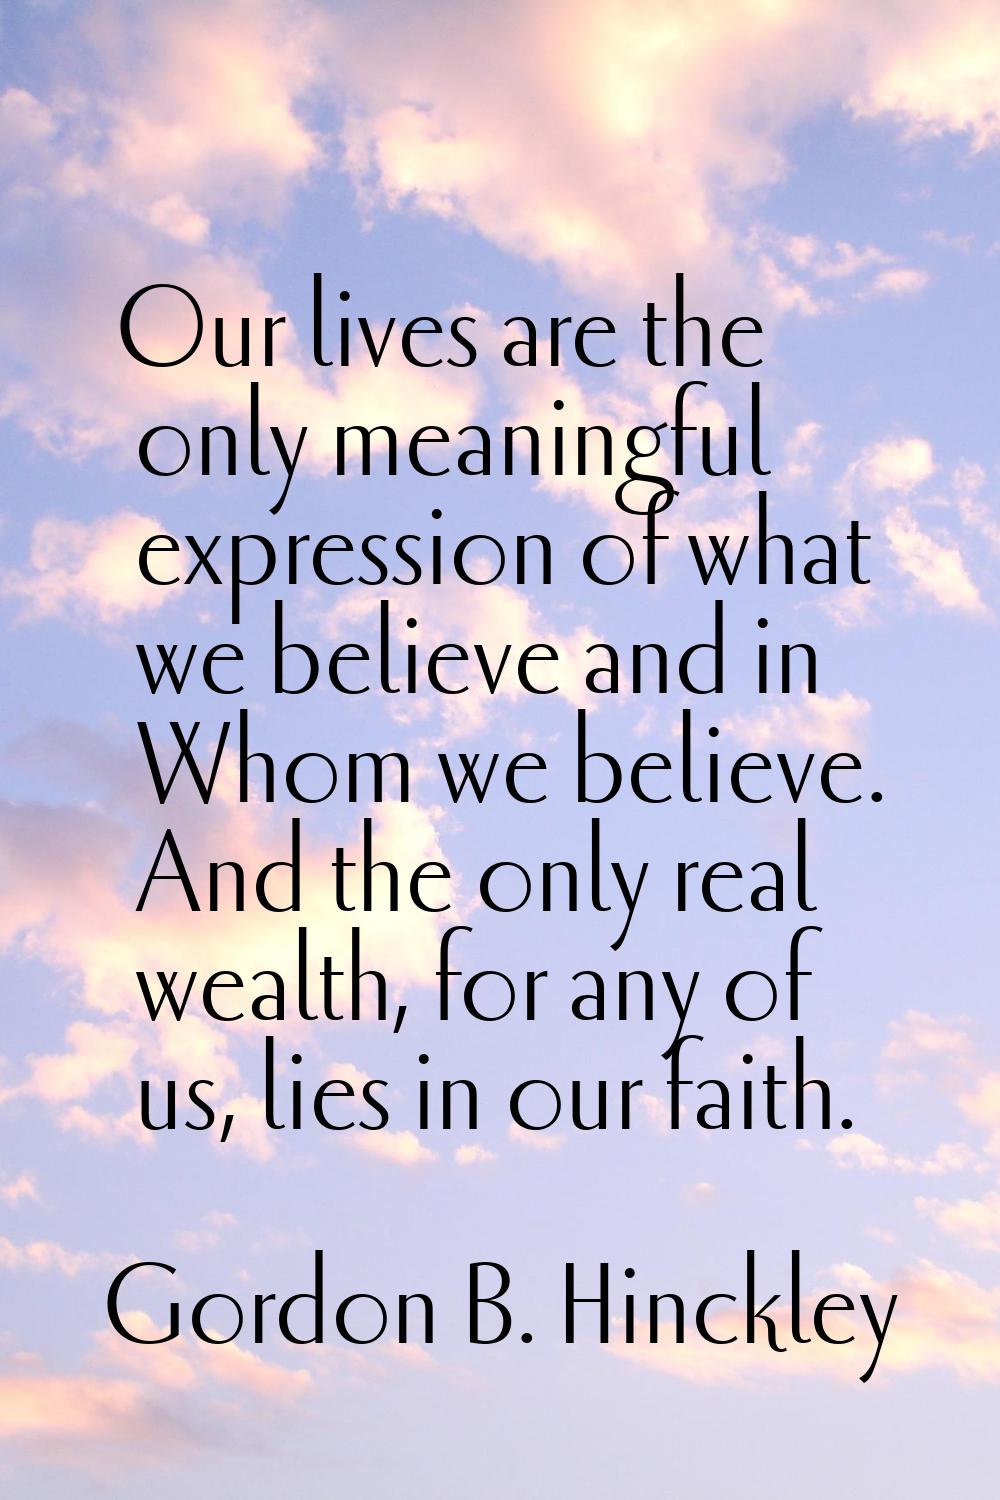 Our lives are the only meaningful expression of what we believe and in Whom we believe. And the onl